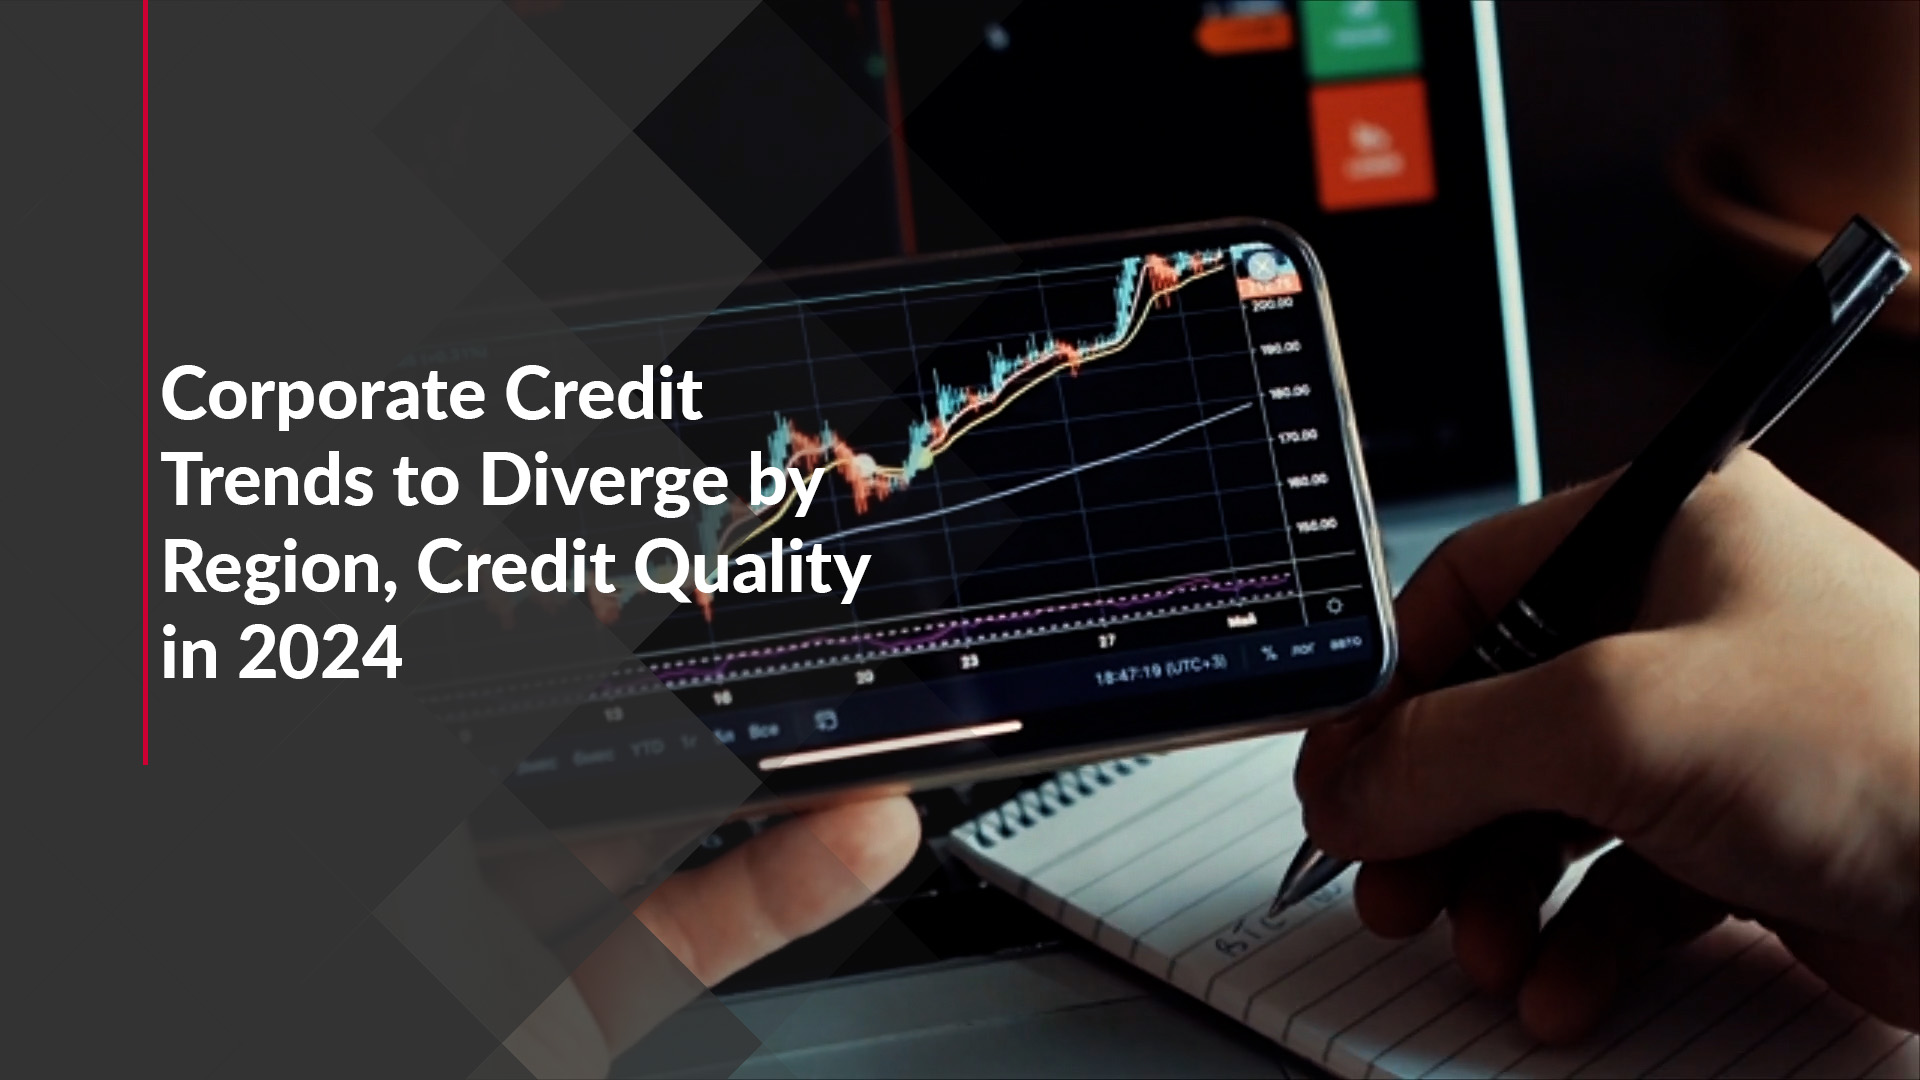 Corporate Credit Trends to Diverge by Region, Credit Quality in 2024